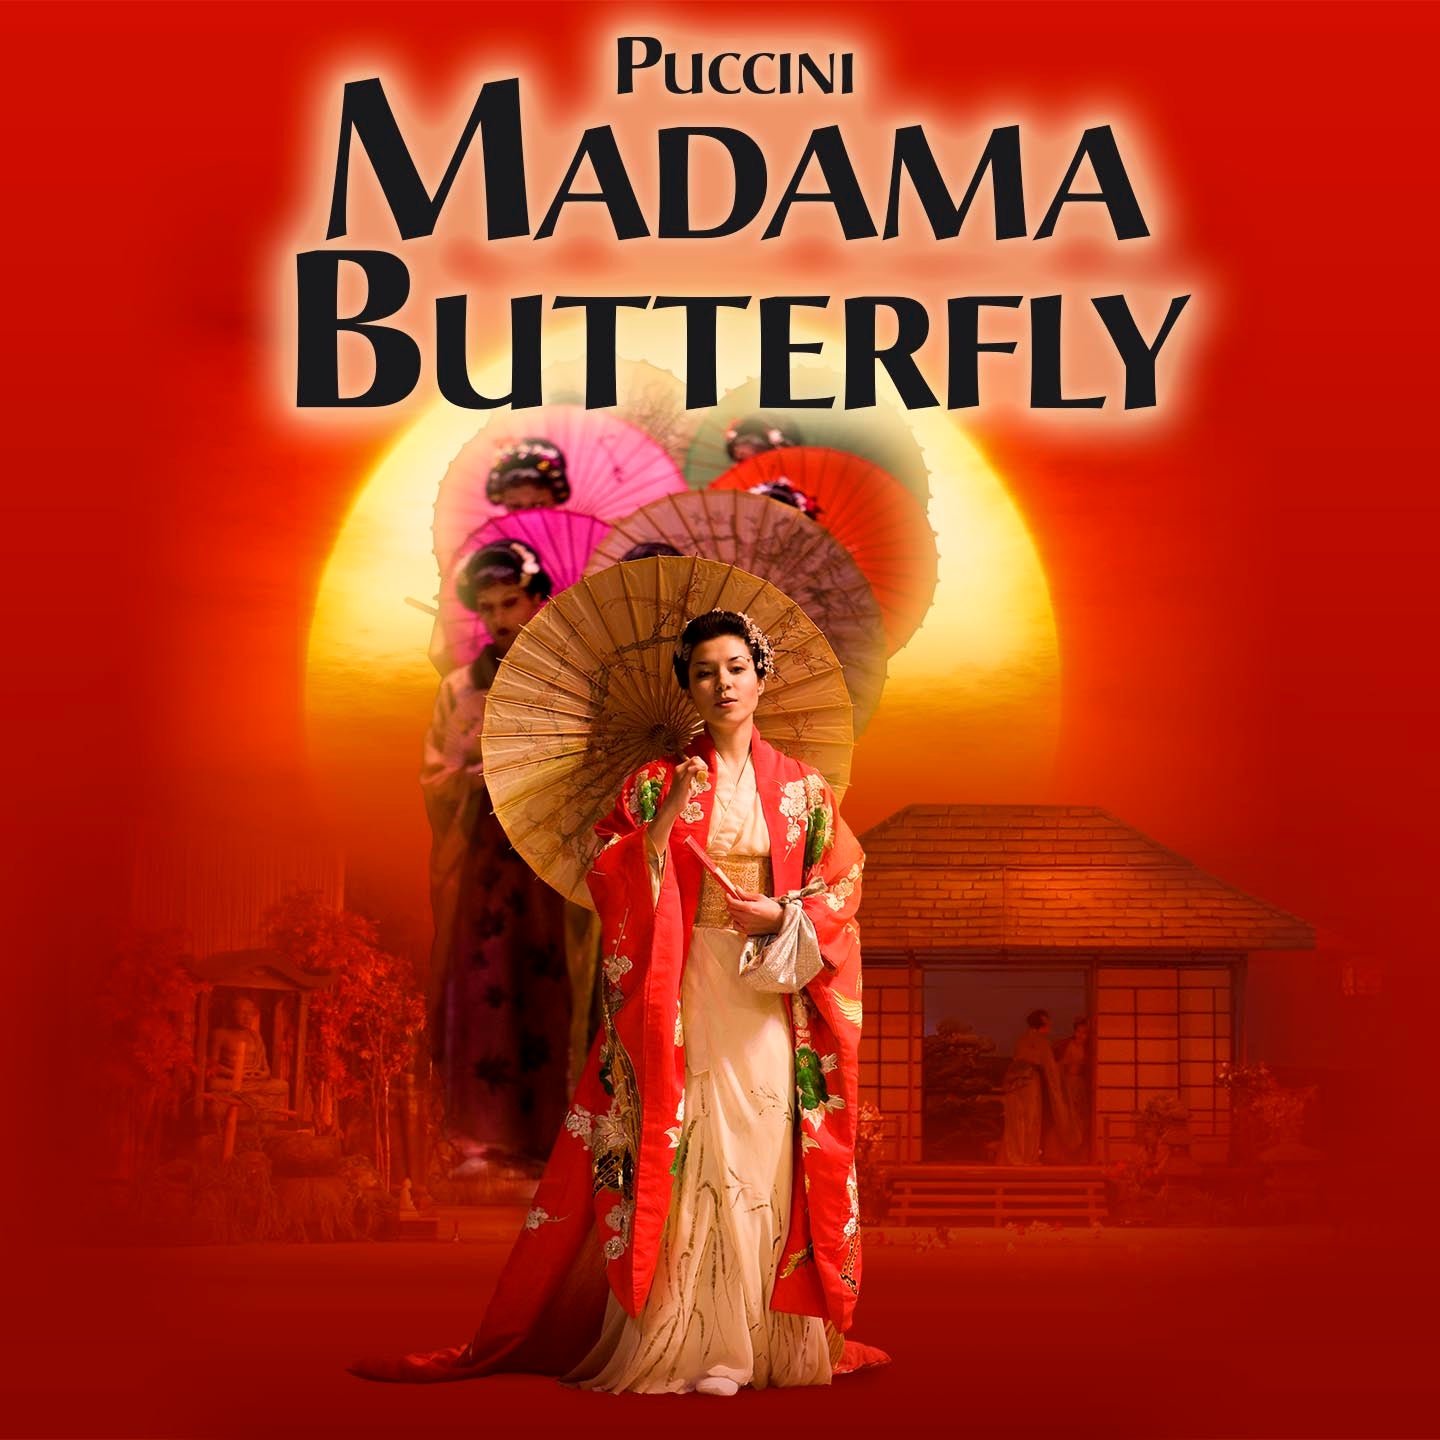 Image name Ellen Kents Madama Butterfly at Hull City Hall Hull the 10 image from the post Ellen Kent's - MADAMA BUTTERFLY at Sheffield City Hall Oval Hall, Sheffield in Yorkshire.com.